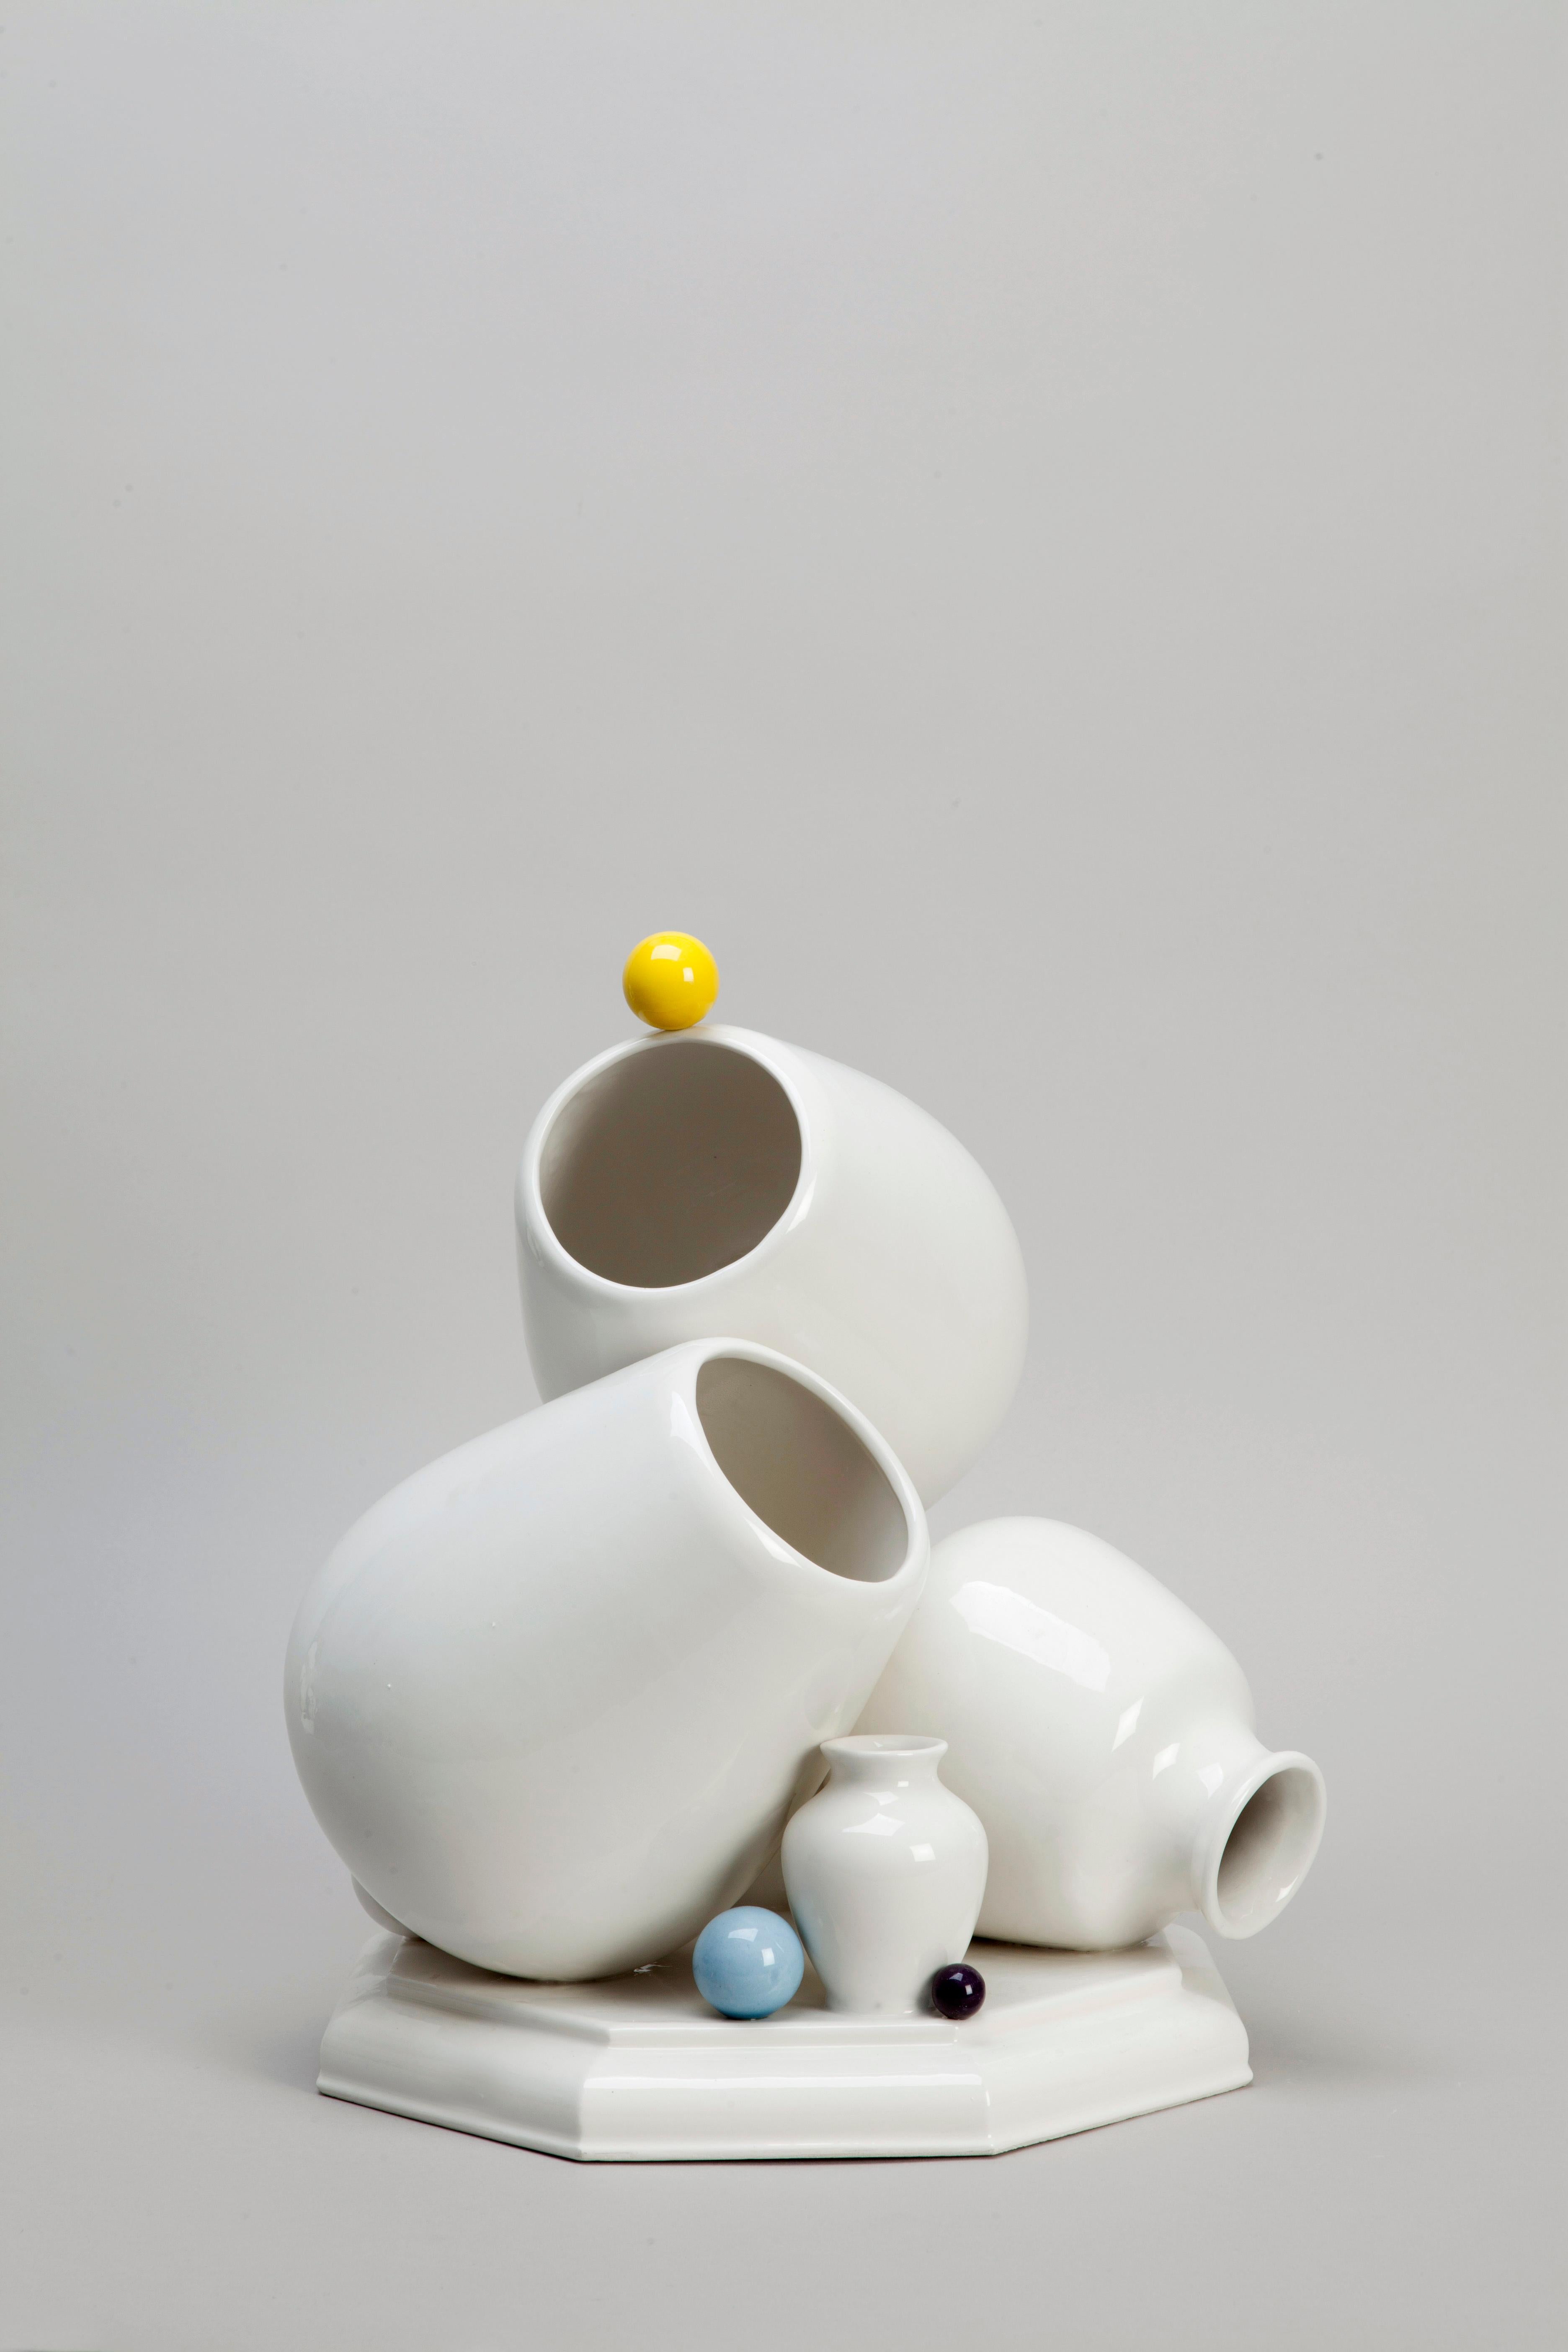 Untitled, 2020, glazed earthenware, approx: H 16 x 15 x 15cm

Andrea Salvatori (Italy, 1975) is an internationally renowned visual artist working with the ceramic medium to realize often ironic and witty sculptures, sometimes involving a diverse